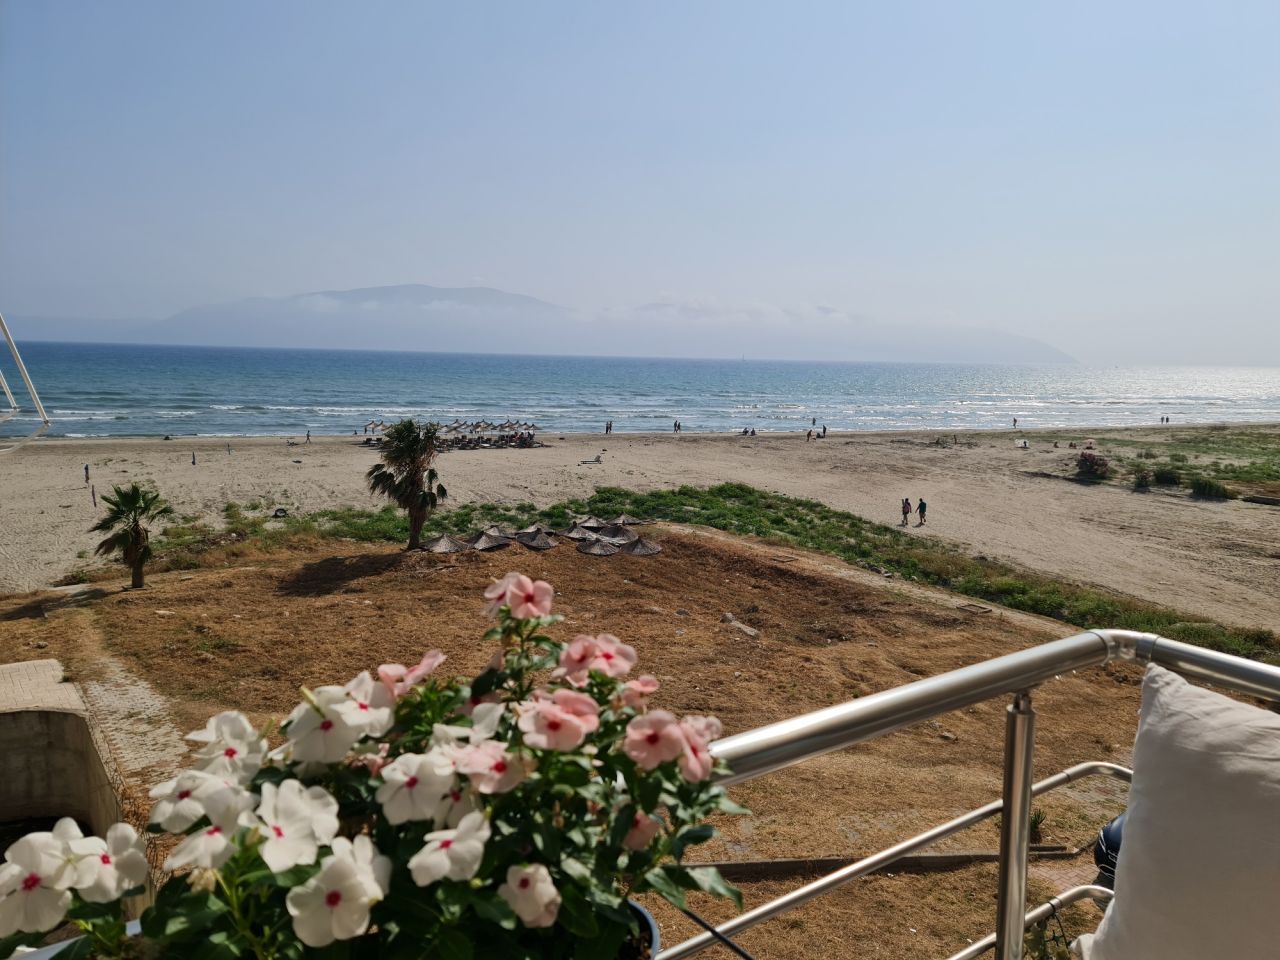 Albania Vacation Apartment For Rent in Vlore